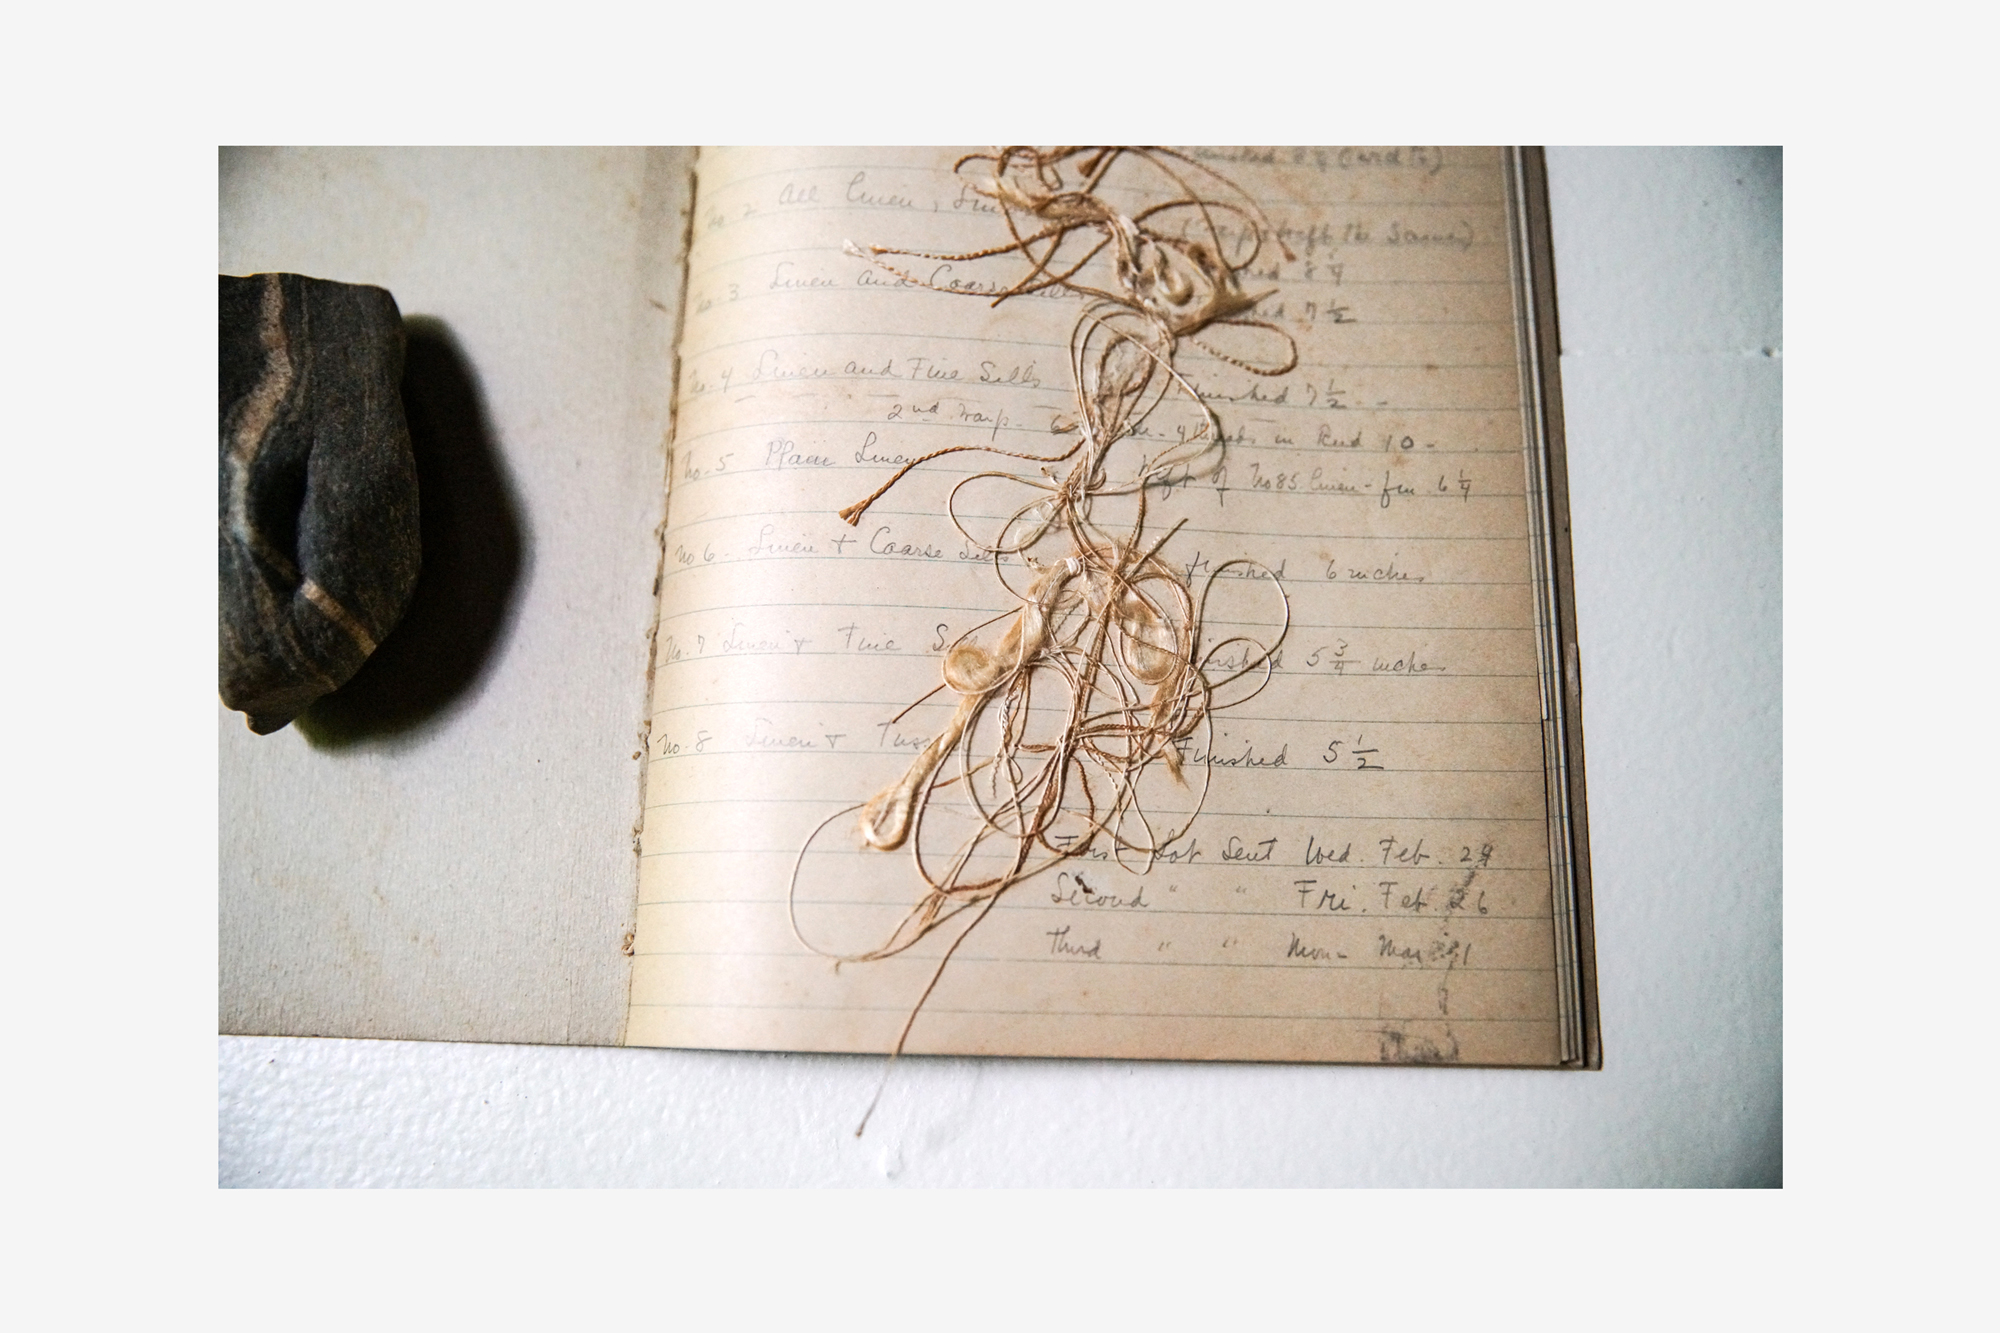 Hand-written notebook with snipped threads lying on the page.